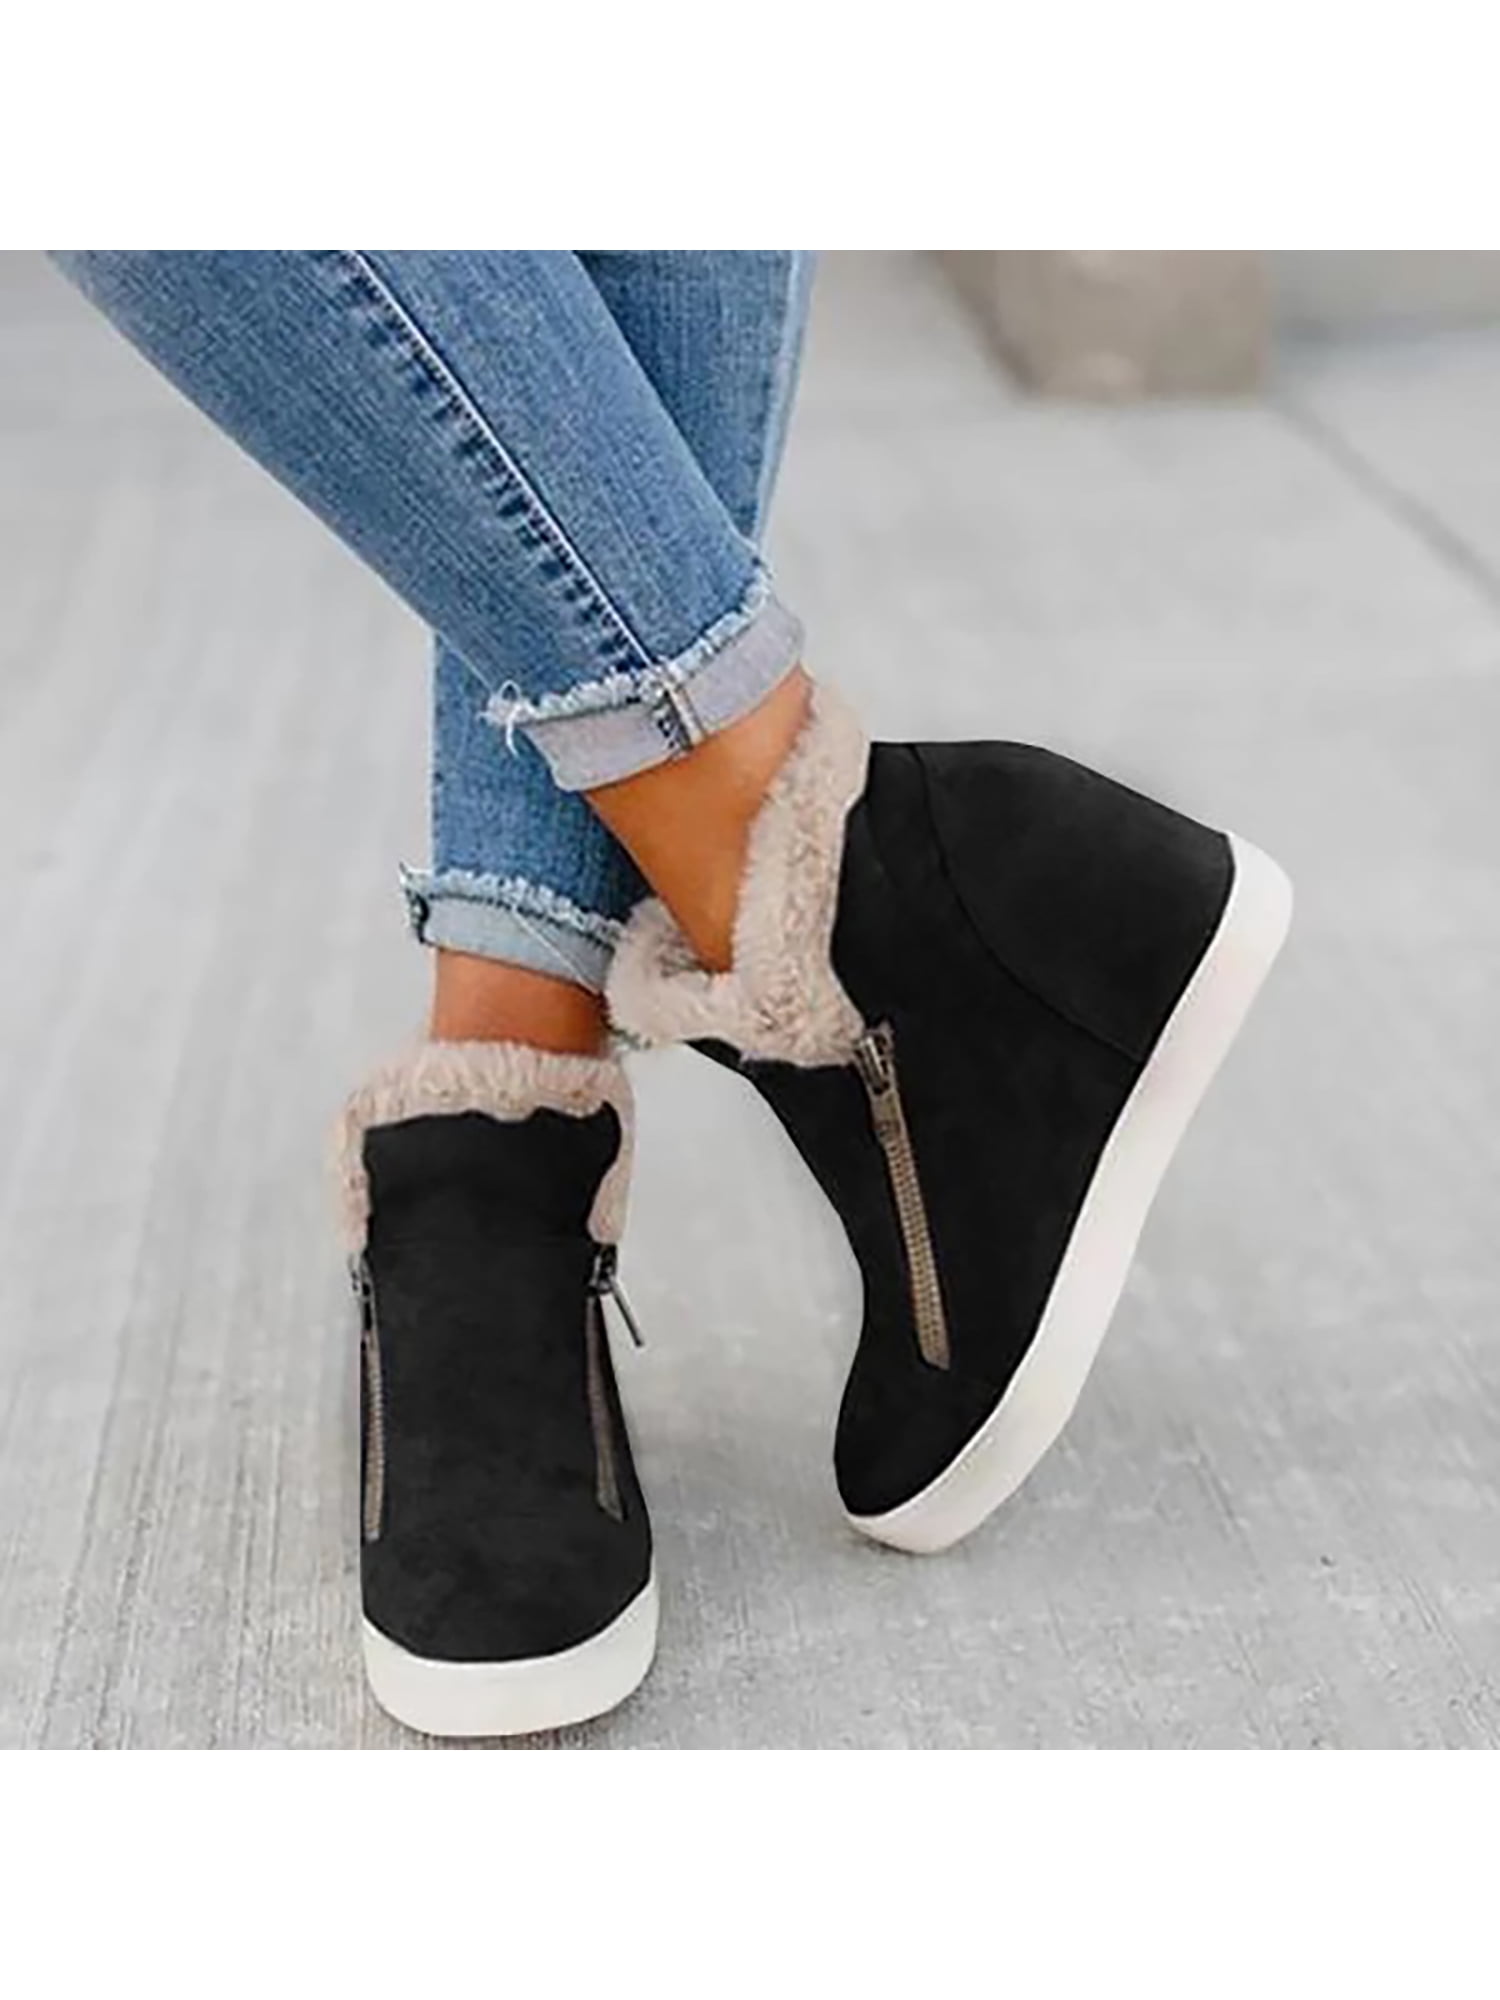 Women Ladies Hidden Wedge Boots Canvas Zip Ankle Shoes Chunky Casual Sneakers